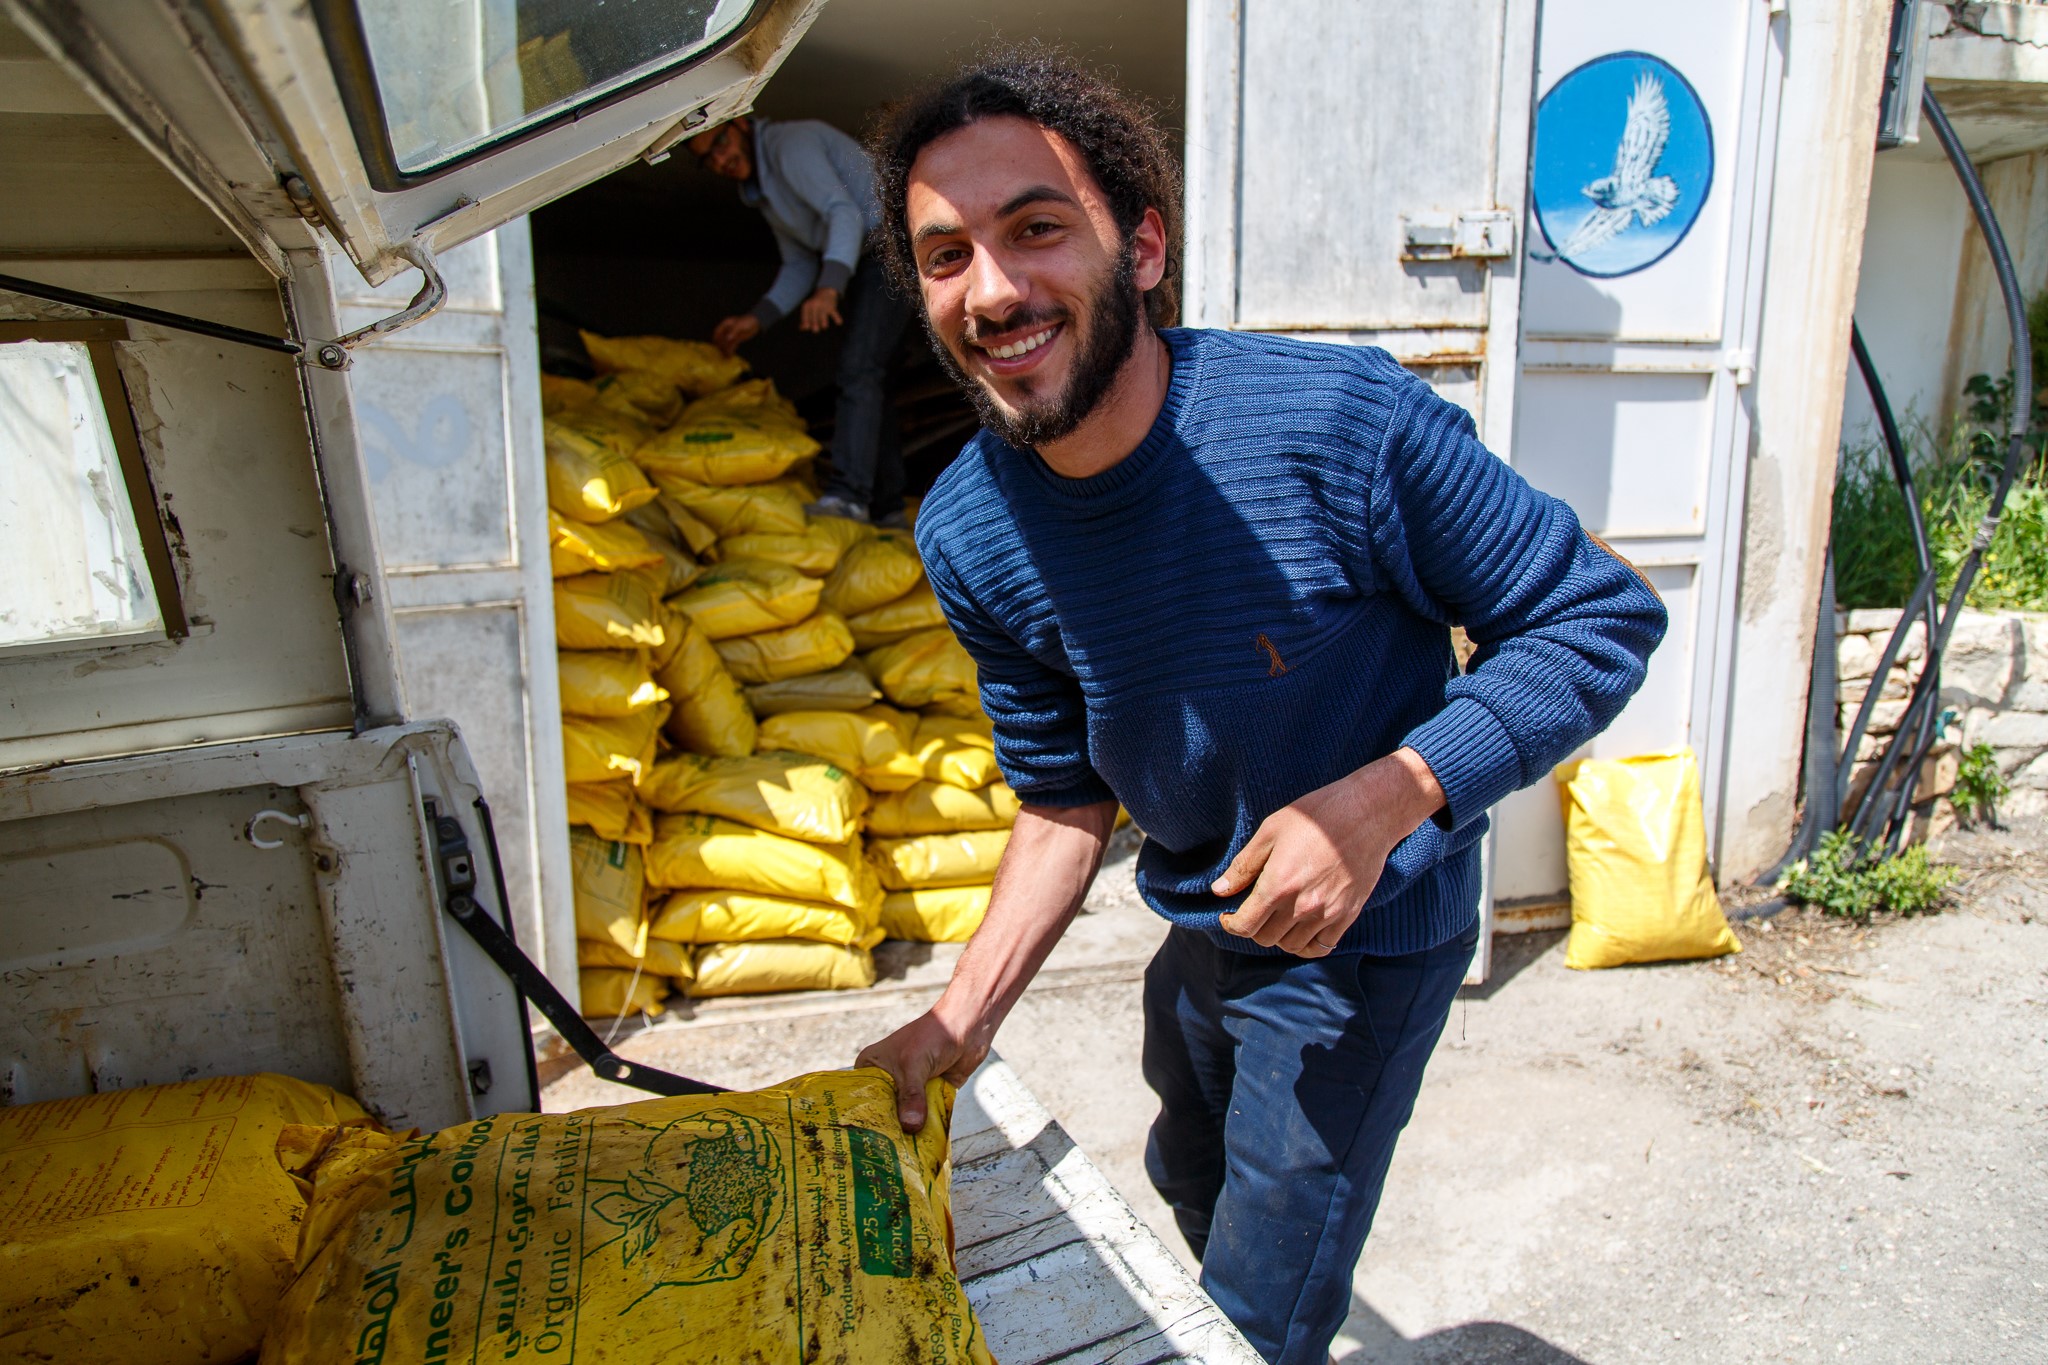 Co-ordinator of the cultural heritage centre at the Museum, Mohammad Najajrah helps to move the compost